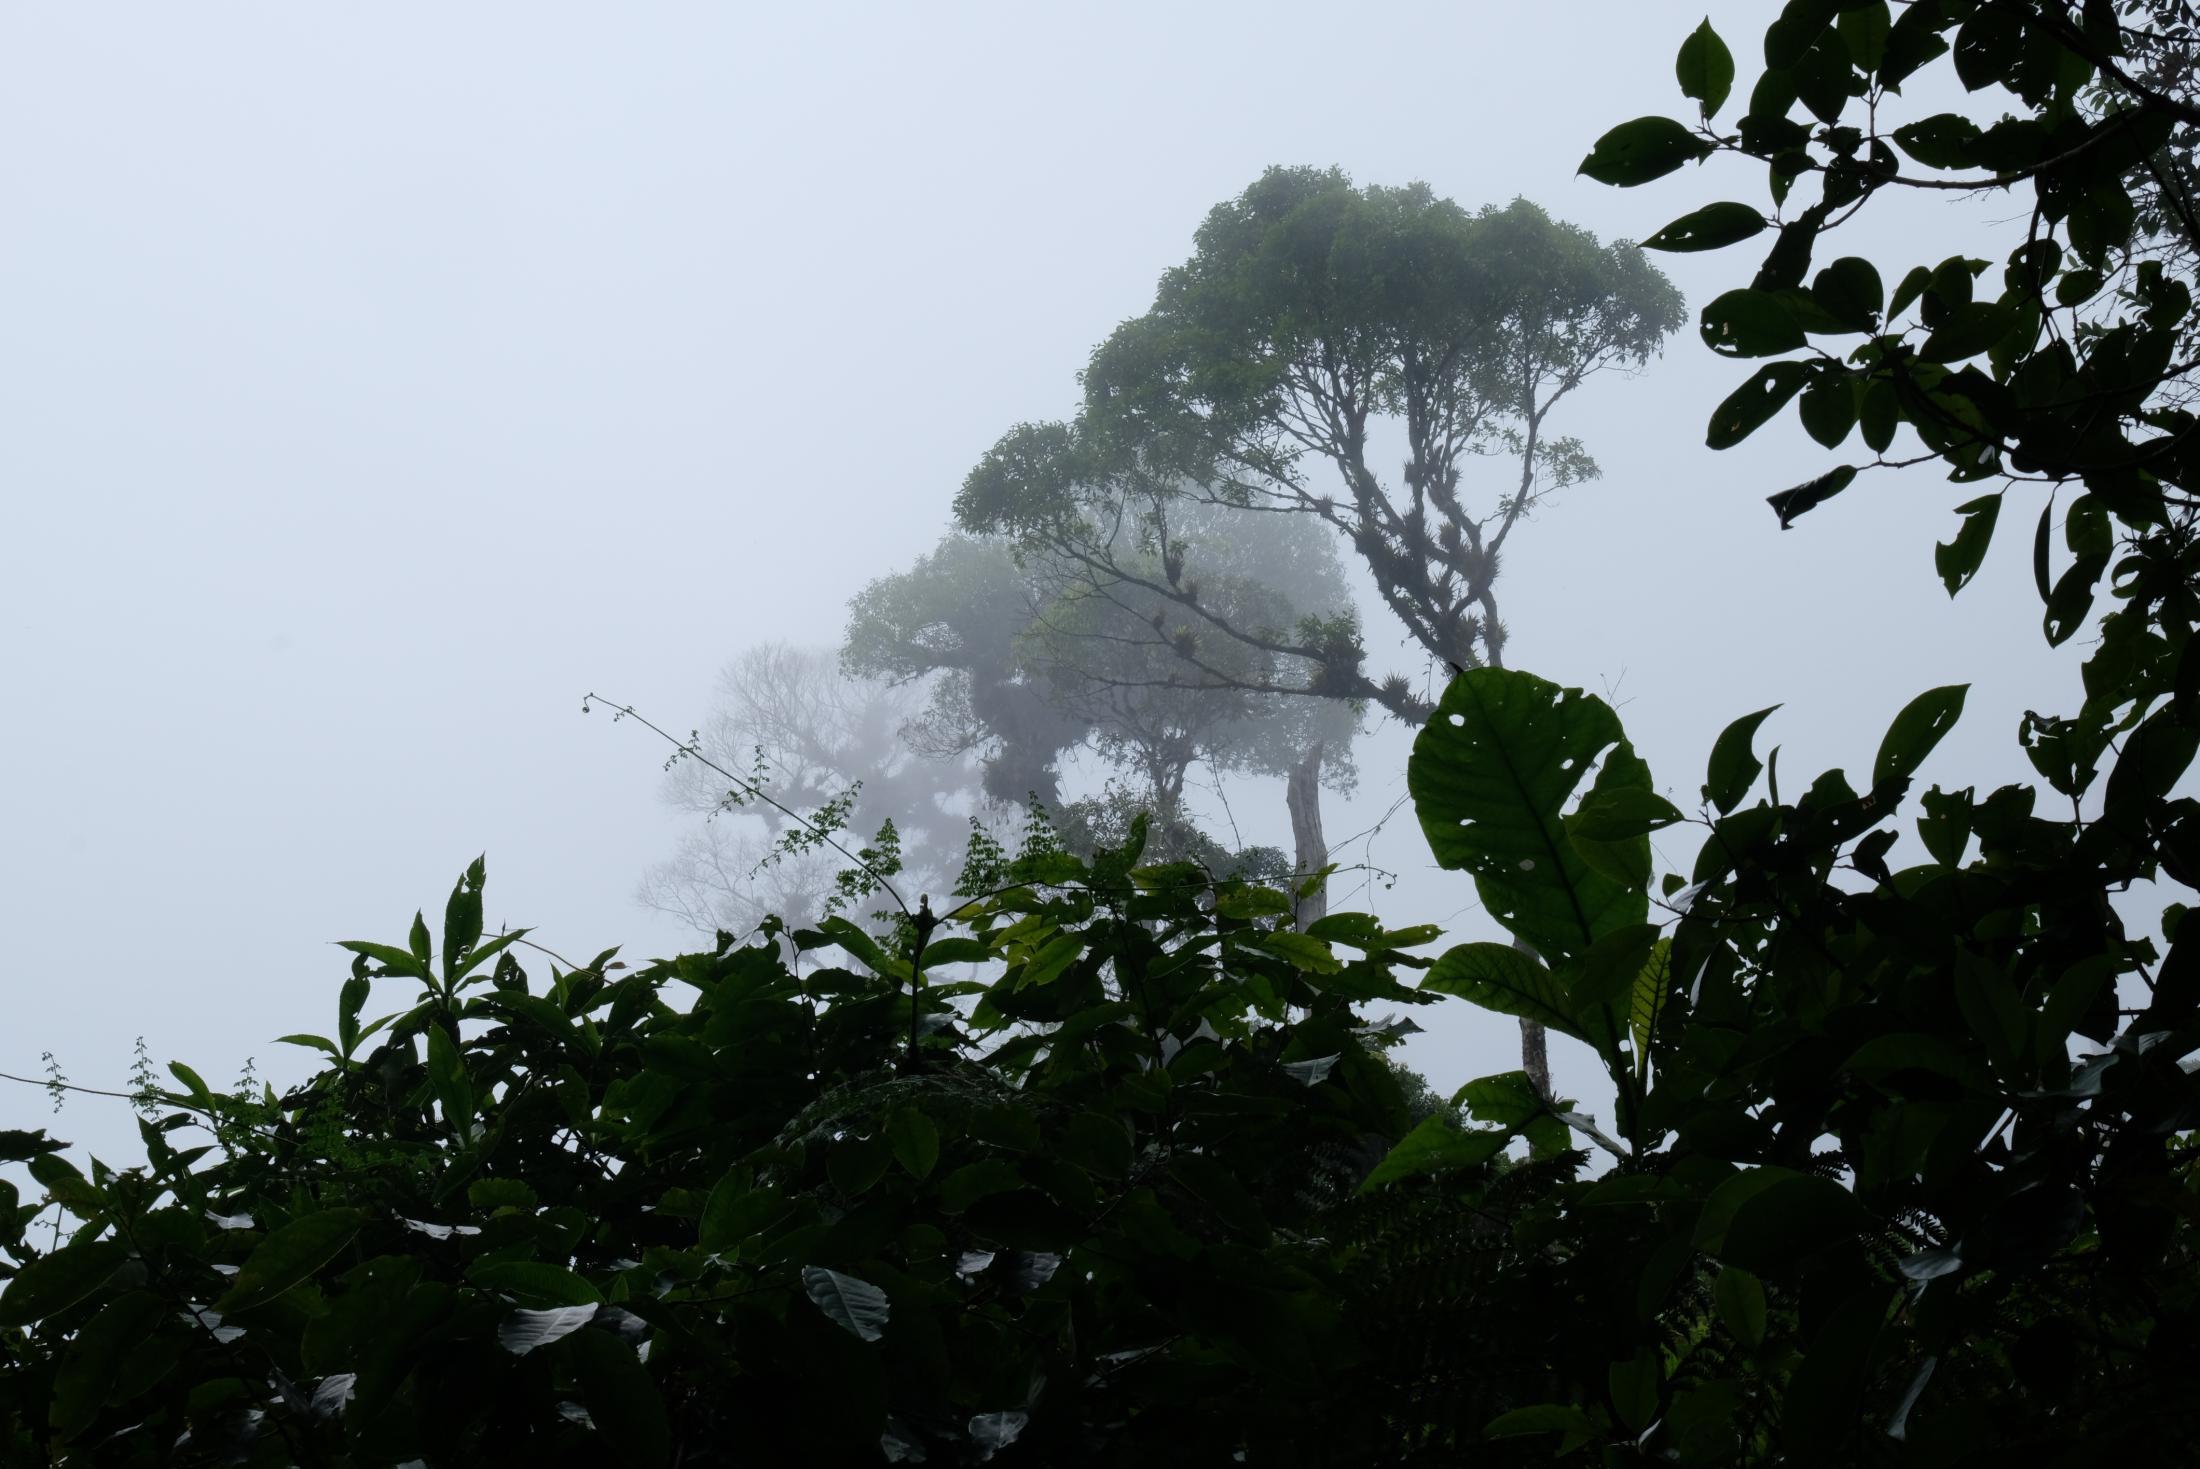 Bienvenidos a la Selva: Parque Nacional Cusuco - Therefore Cloud Forests are most at risk of the effects...